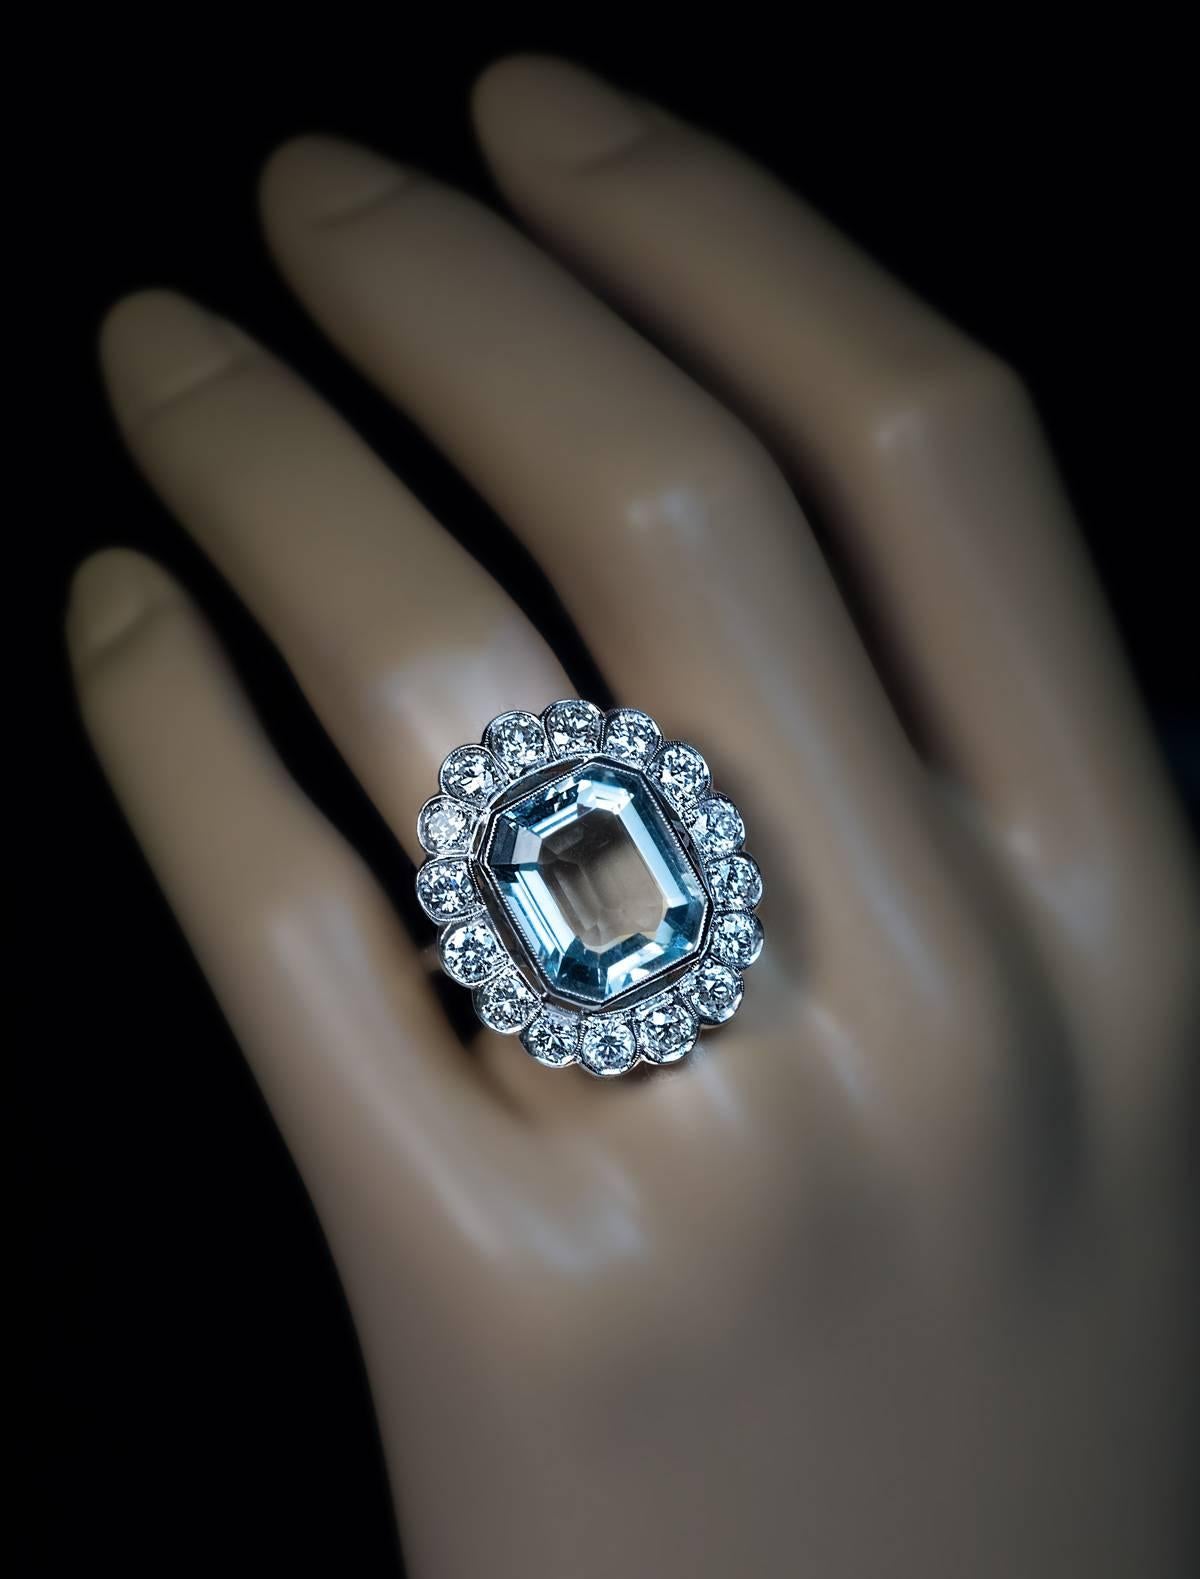 An impressive hand-crafted platinum ring from Art Deco era is centered with an emerald cut cool greenish-blue aquamarine (measuring 14.3 x 12 x 6.45 mm, approximately 7.58 ct) framed by sixteen old European and transitional cut brilliant